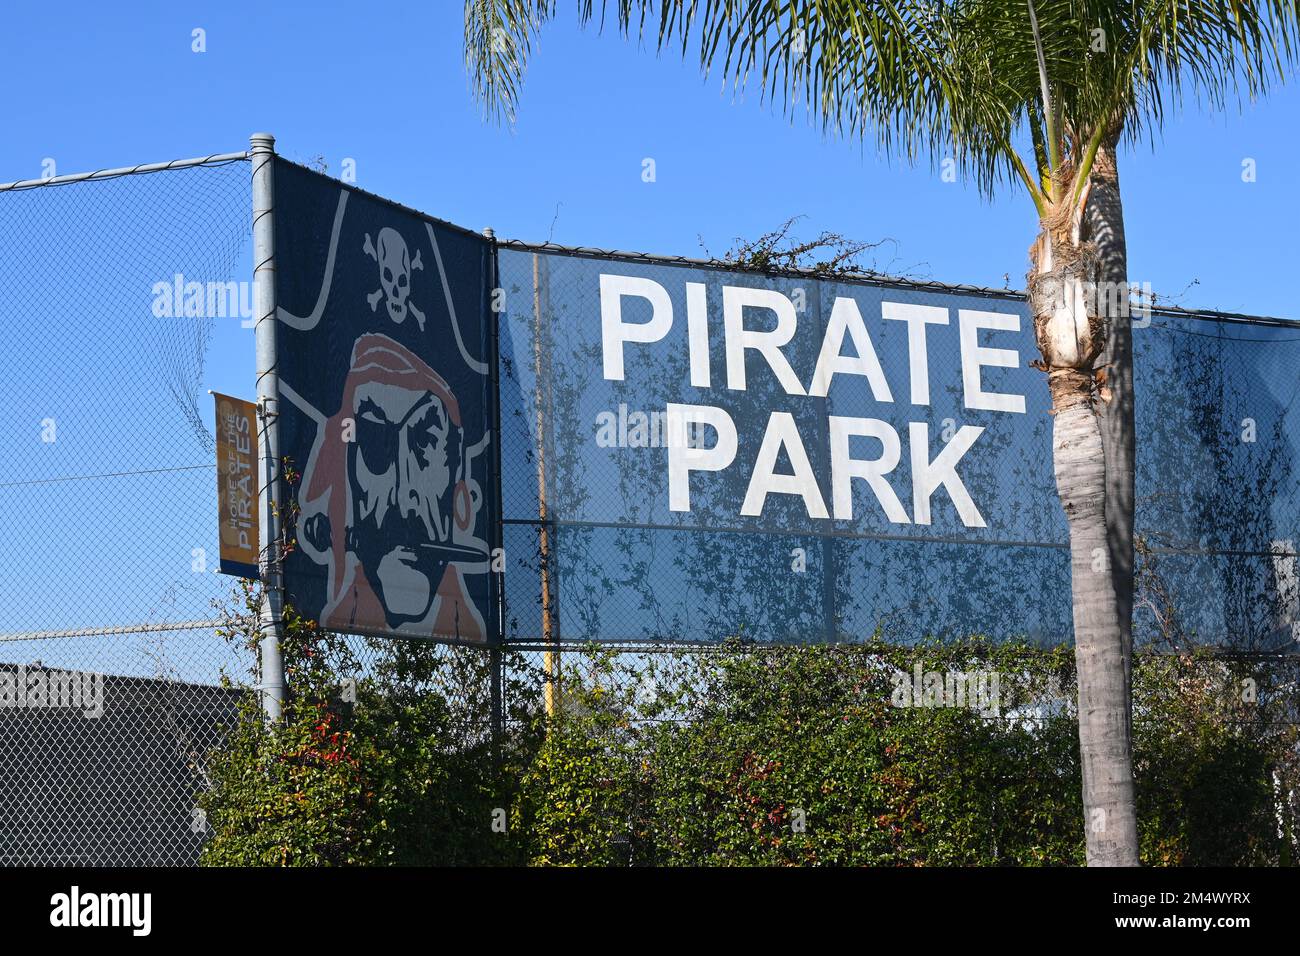 COSTA MESA, CALIFORNIA - 19 DEC 2022:  Pirate Park banner on the outfield fence of the baseball stadium on the Campus of Orange Coast College, OCC. Stock Photo